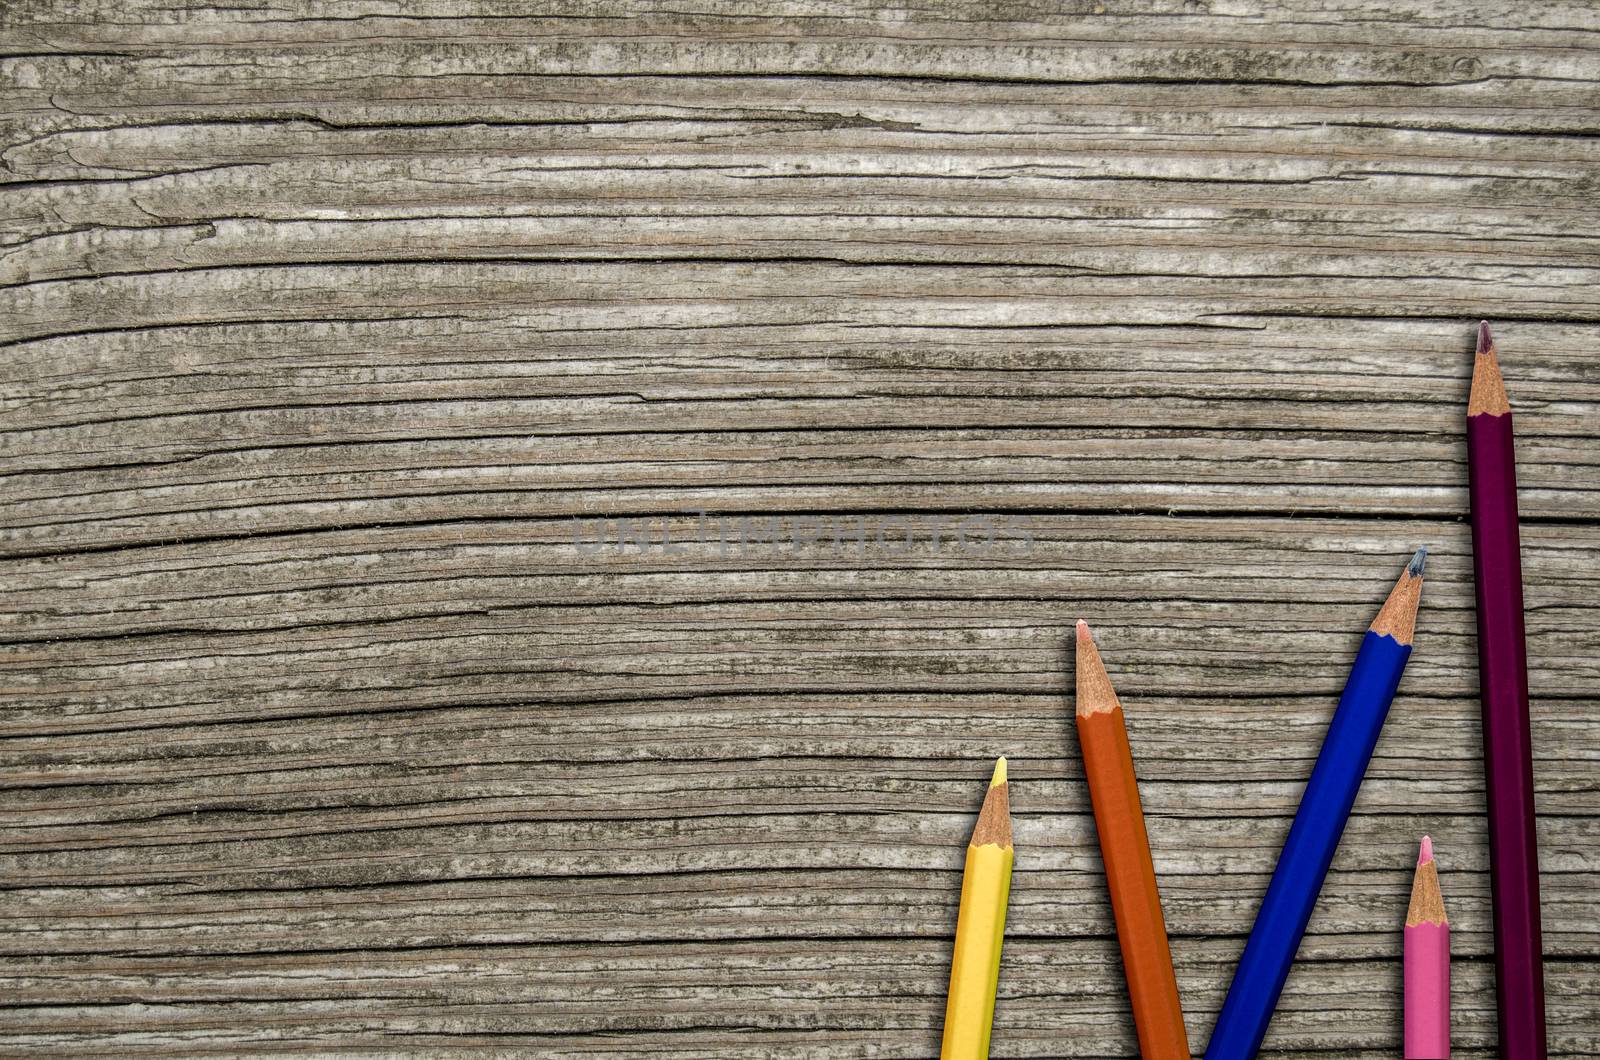 Back To School Image Of Some Colored Pencils On A Rustic Wooden Desk